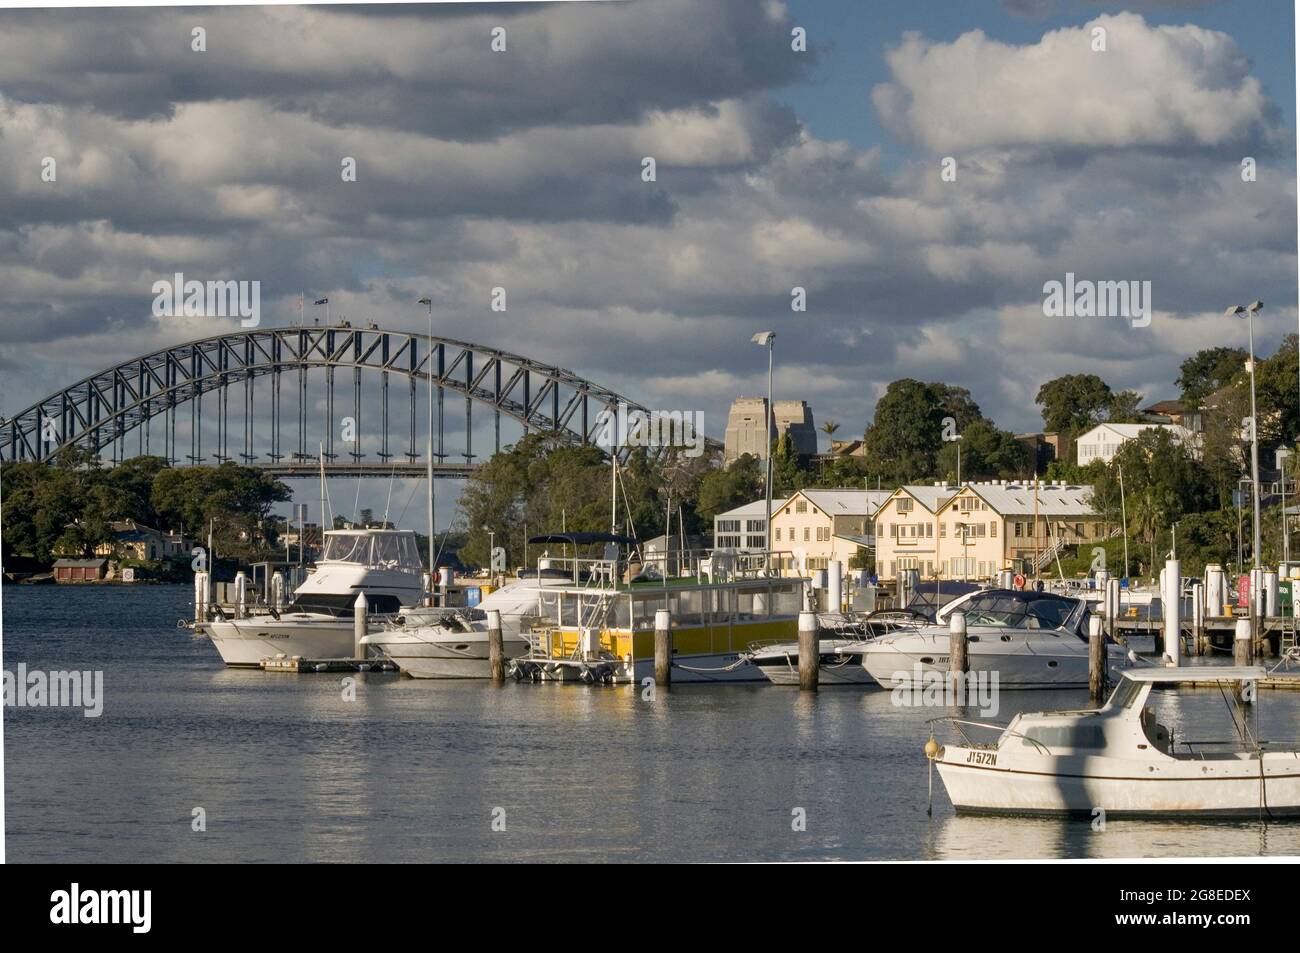 Sydney Harbour Bridge viewed from the suburb of Balmain, New South Wales, Australia Stock Photo